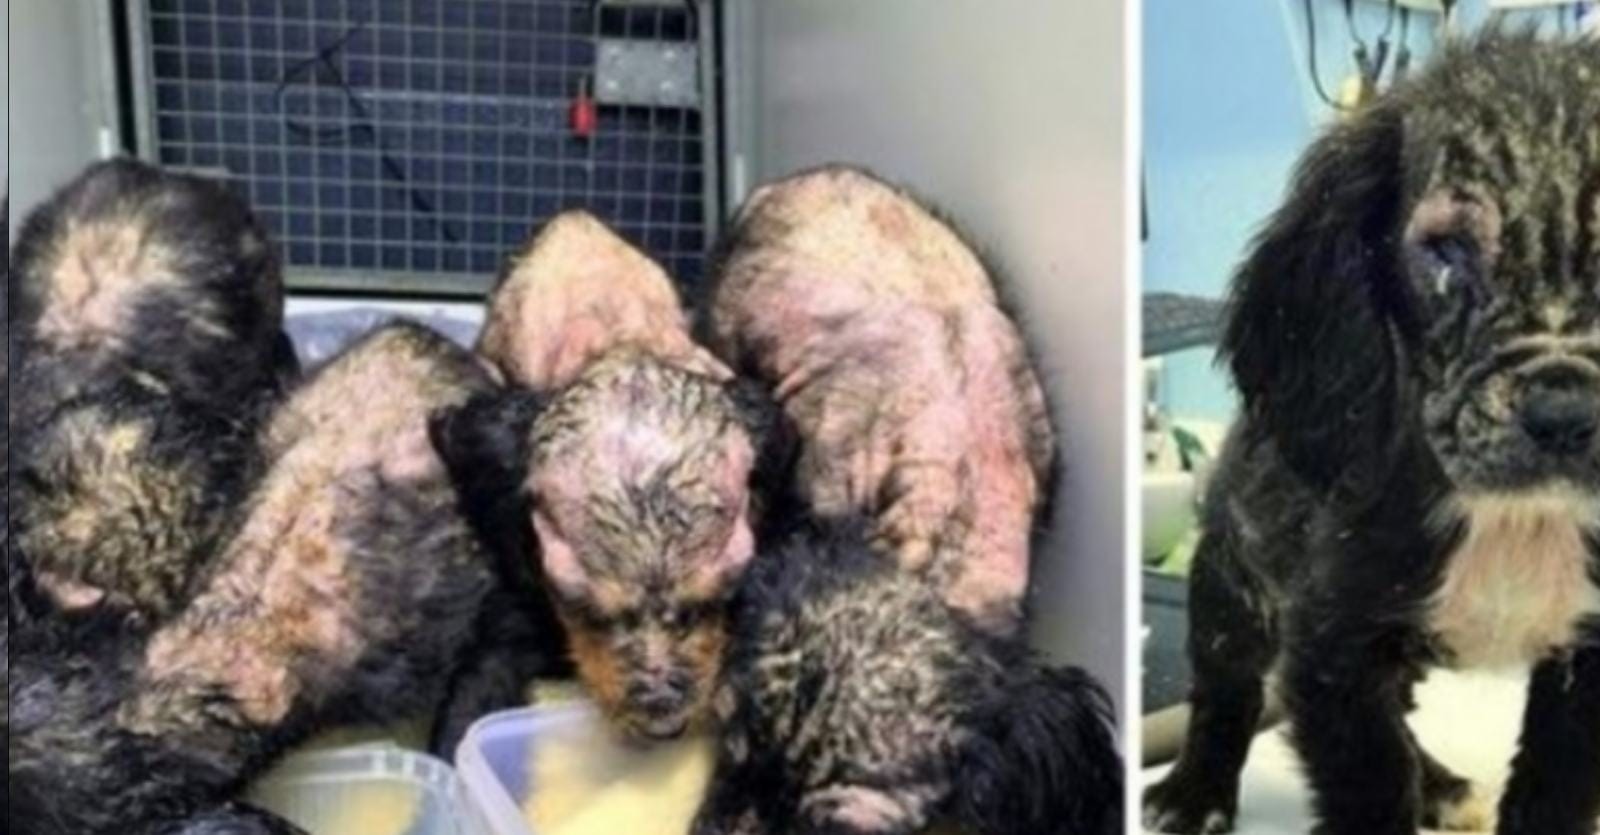 One in four puppies turned out to be different from the others after they were discovered rotting